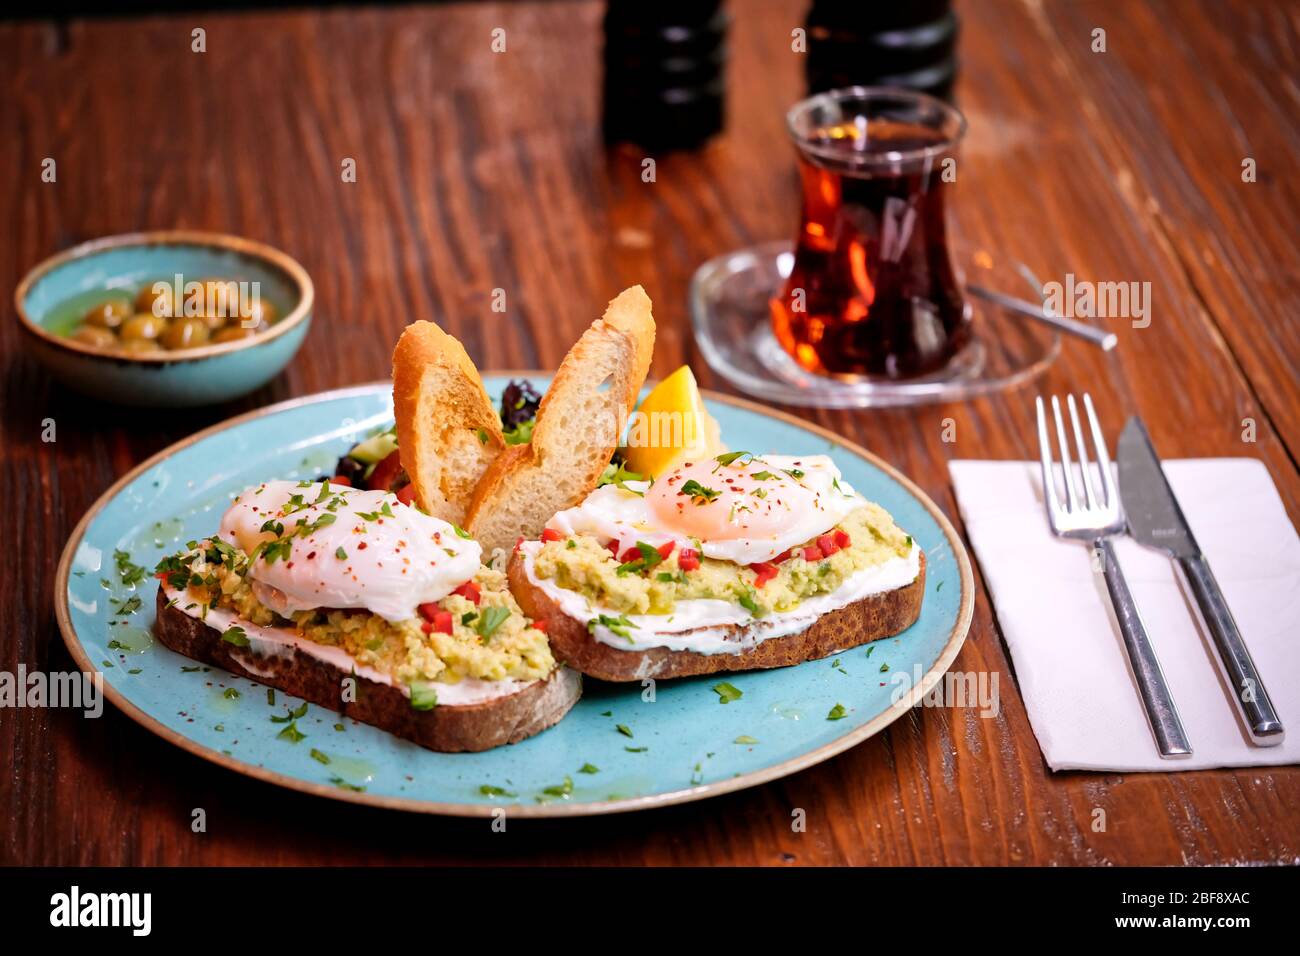 Traditional Turkish tea on bread for breakfast in the morning and Pois egg over avocado. Traditional Turkish tea and breakfast. Stock Photo